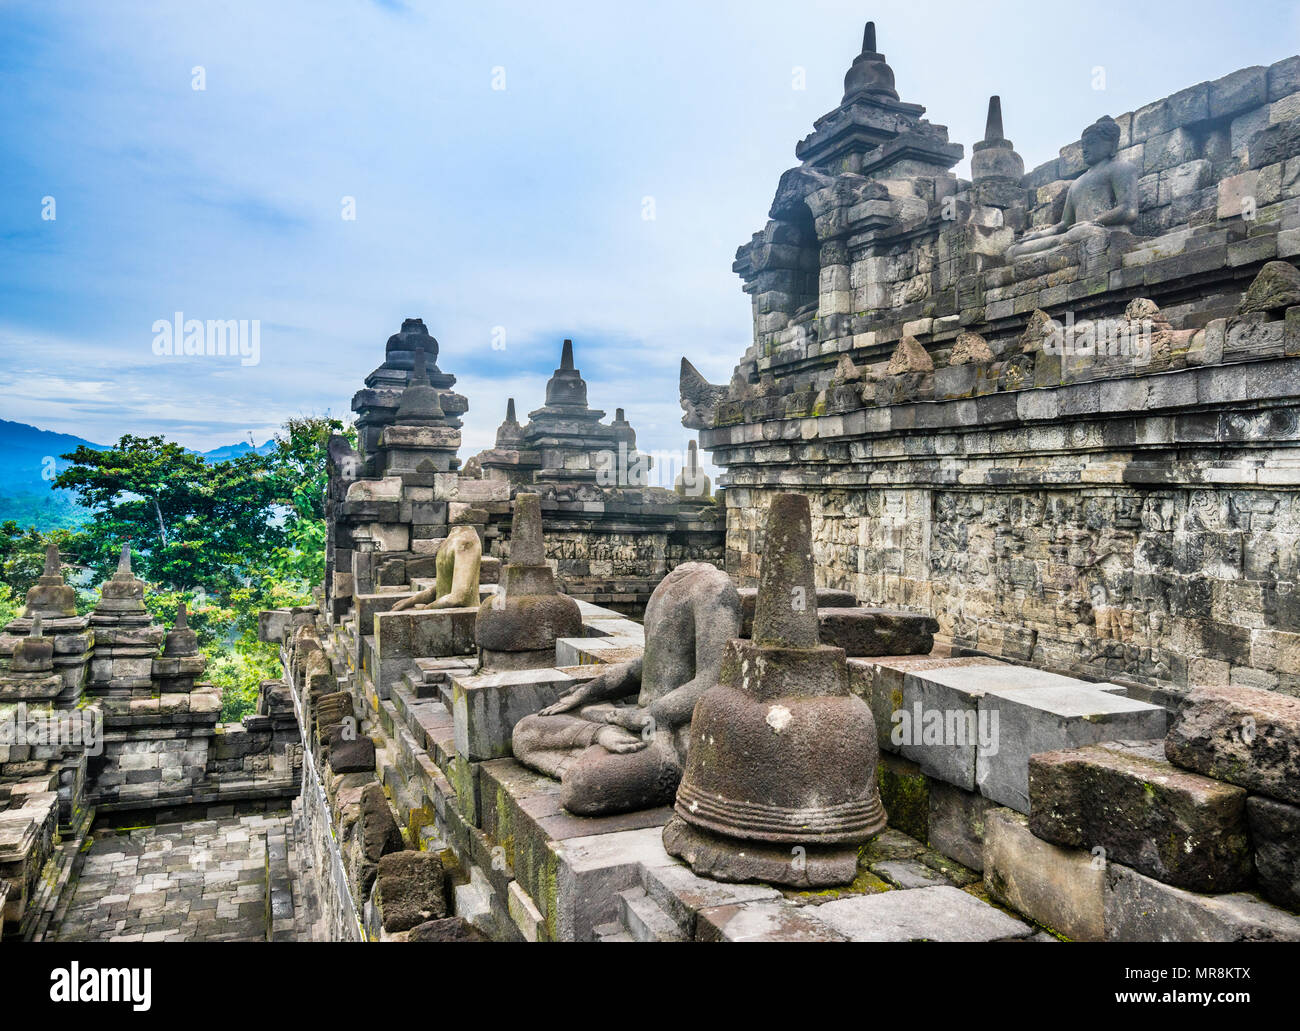 sitting Buddha statues on an outer balustrades of the 9th century Borobudur Buddhist temple, Central Java, Indonesia Stock Photo